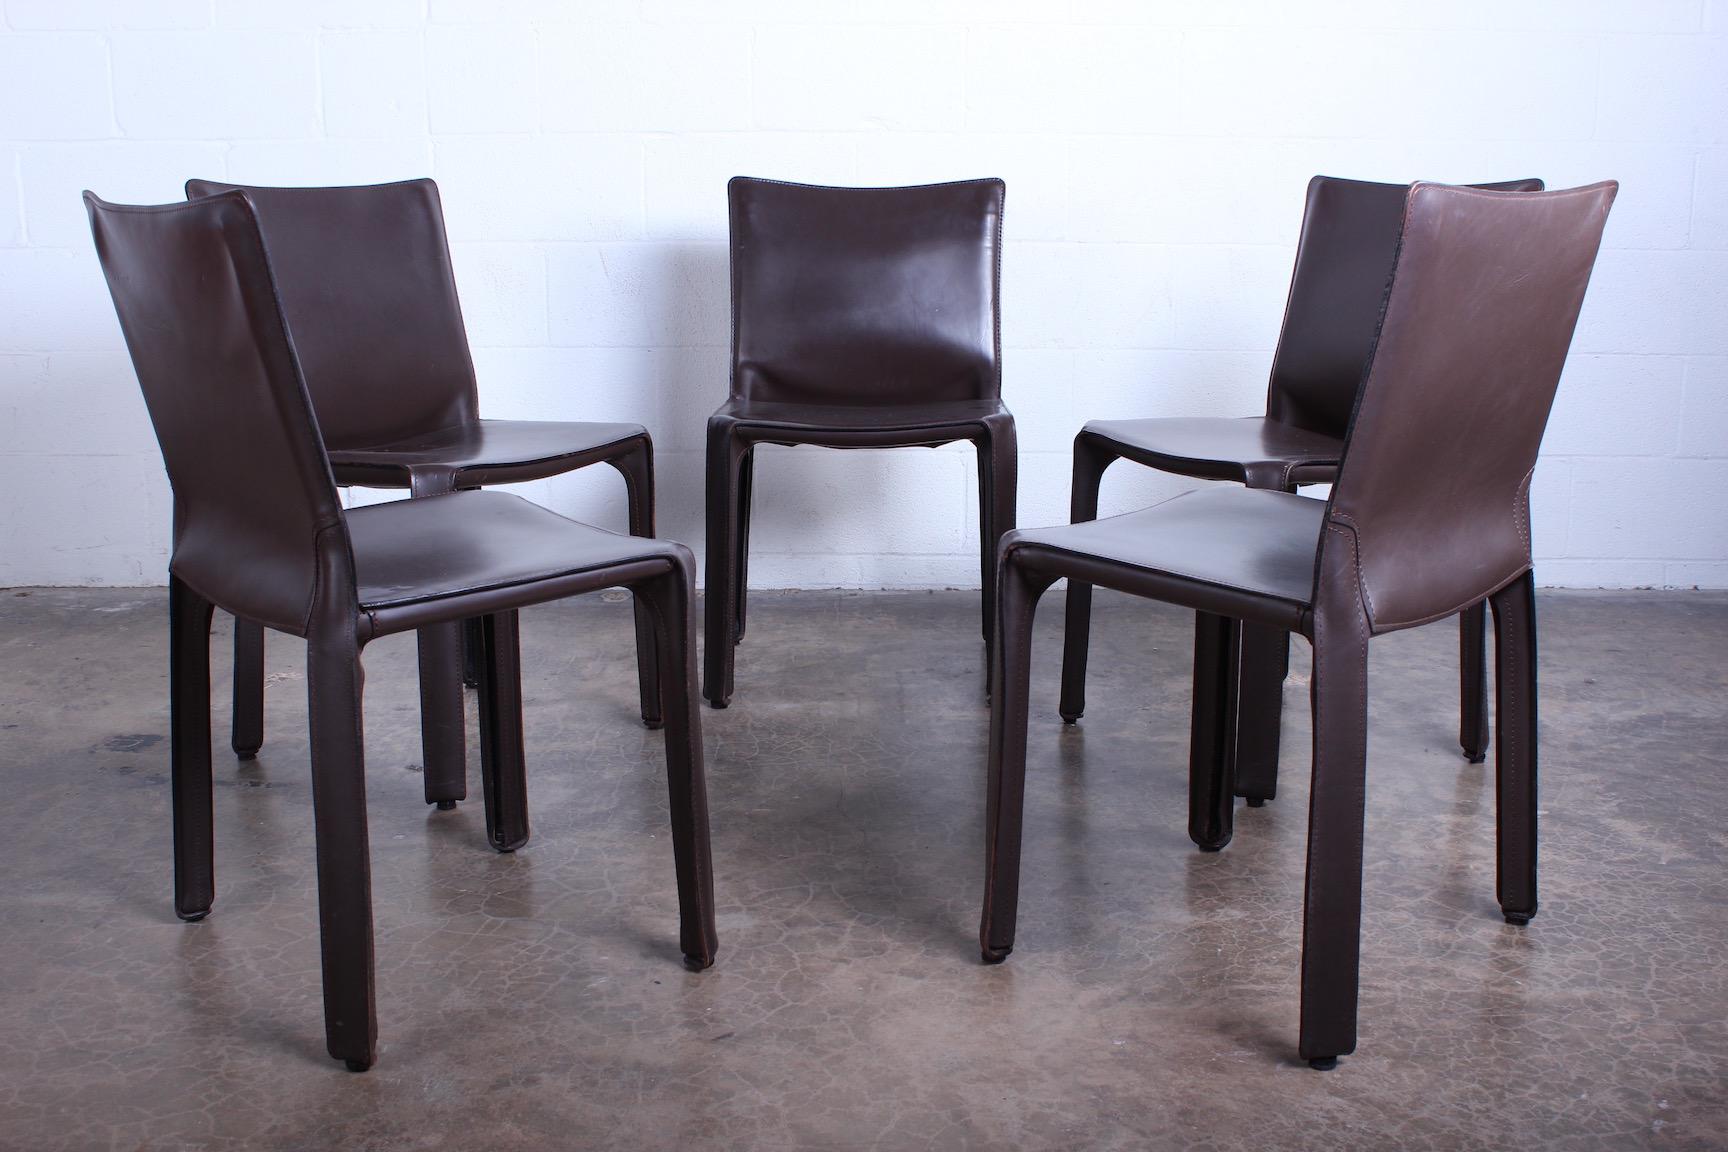 Set of Five Cab Chairs by Mario Bellini 1